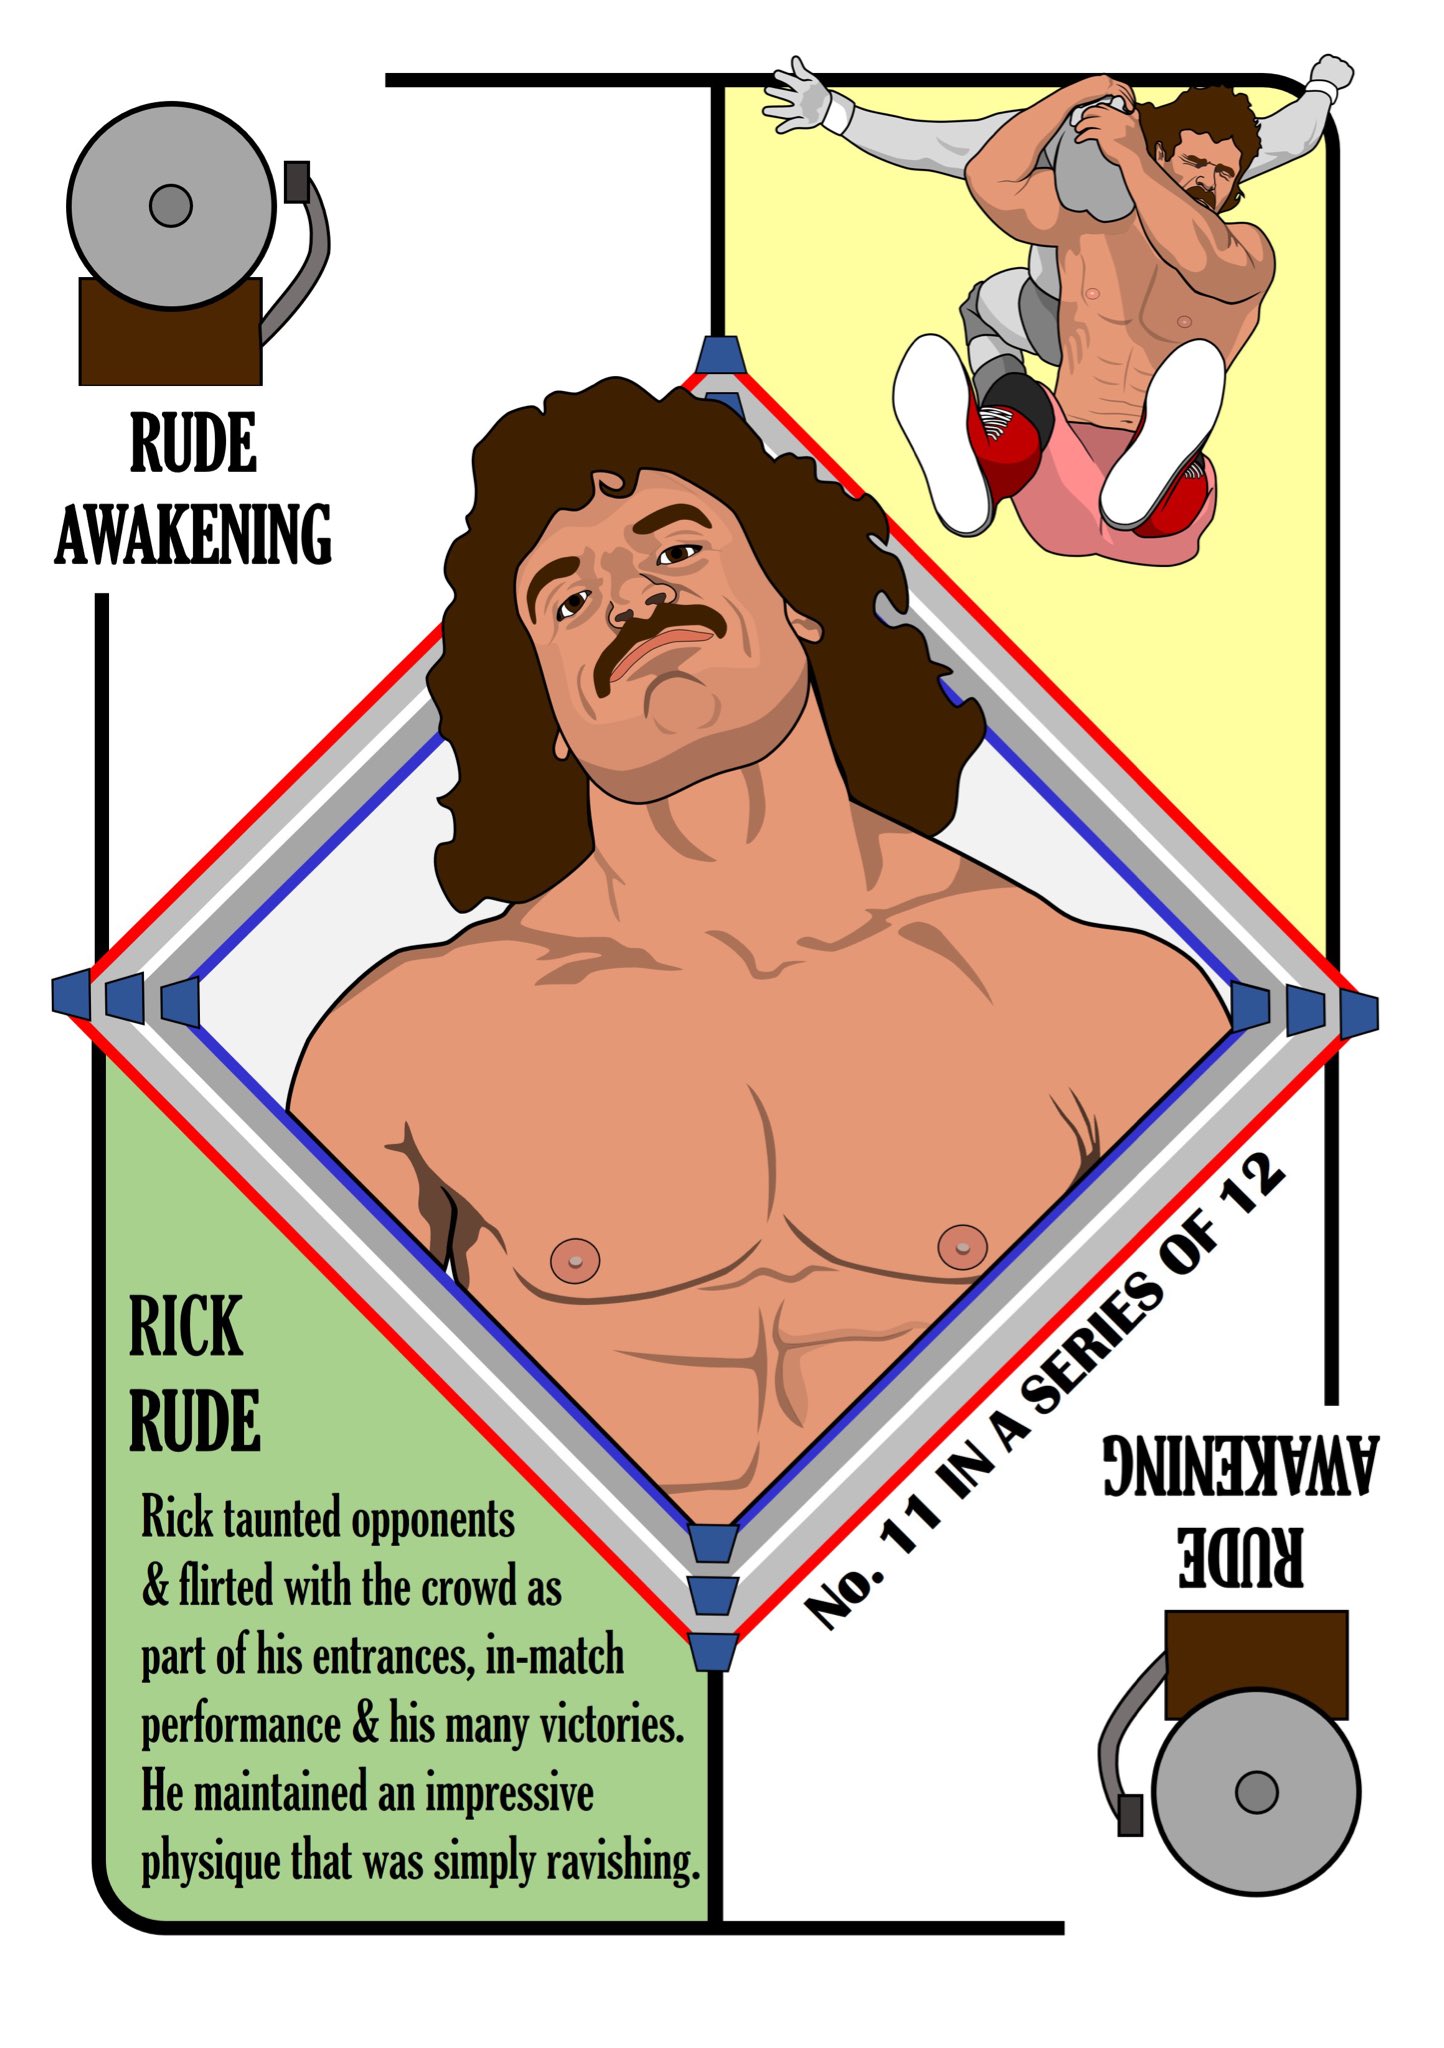 Happy Birthday to Rick Rude who would have been 63 today. 